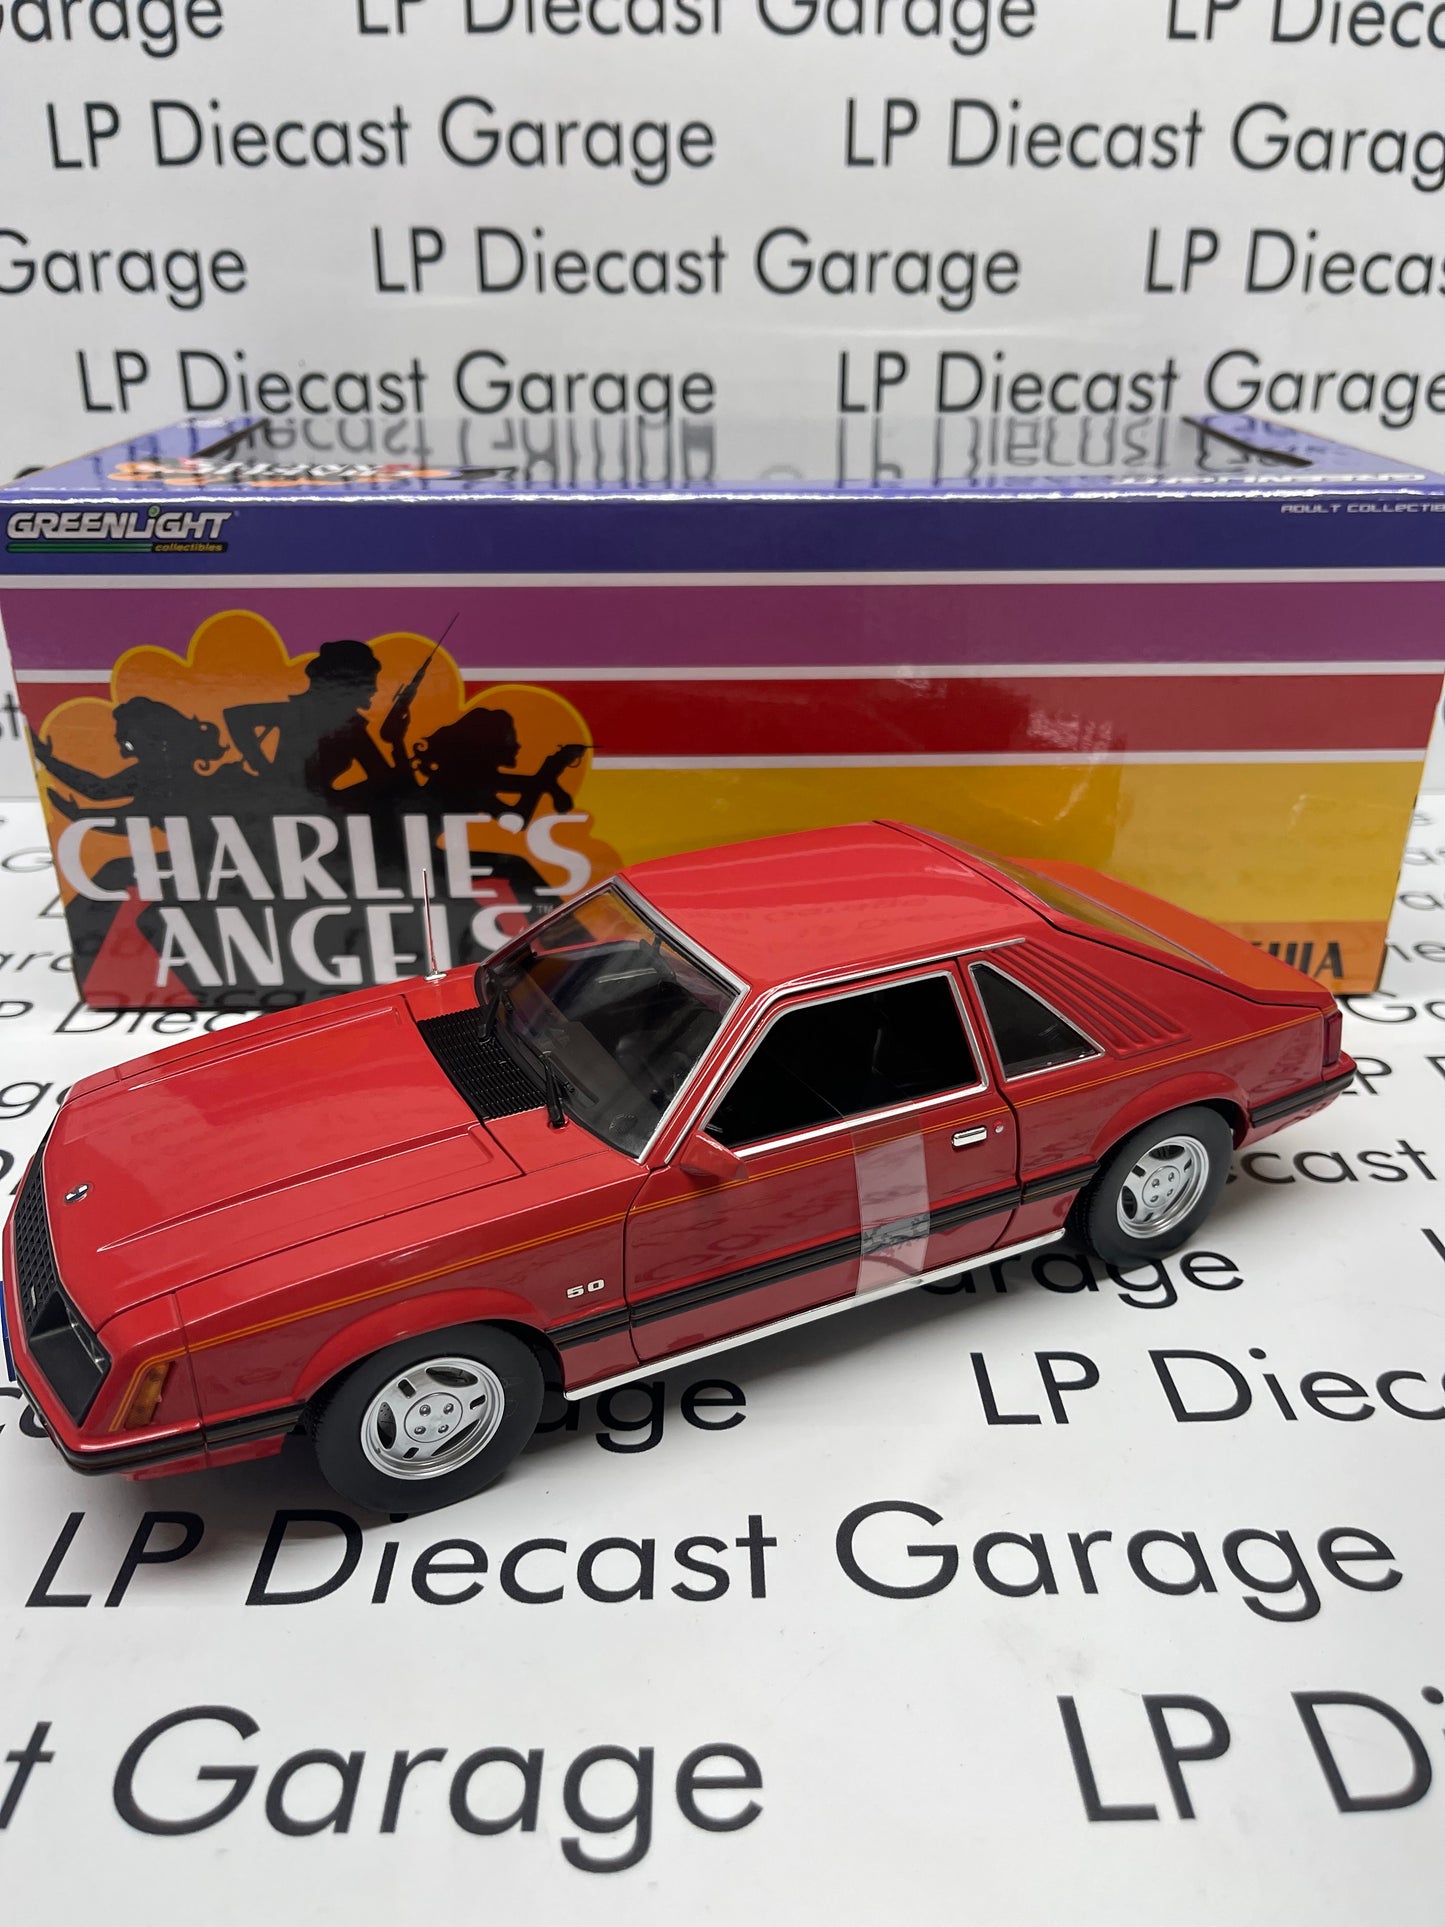 GREENLIGHT 1979 Ford Mustang Ghia Red & Black Charlies Angels Hatchback 1:18 Diecast